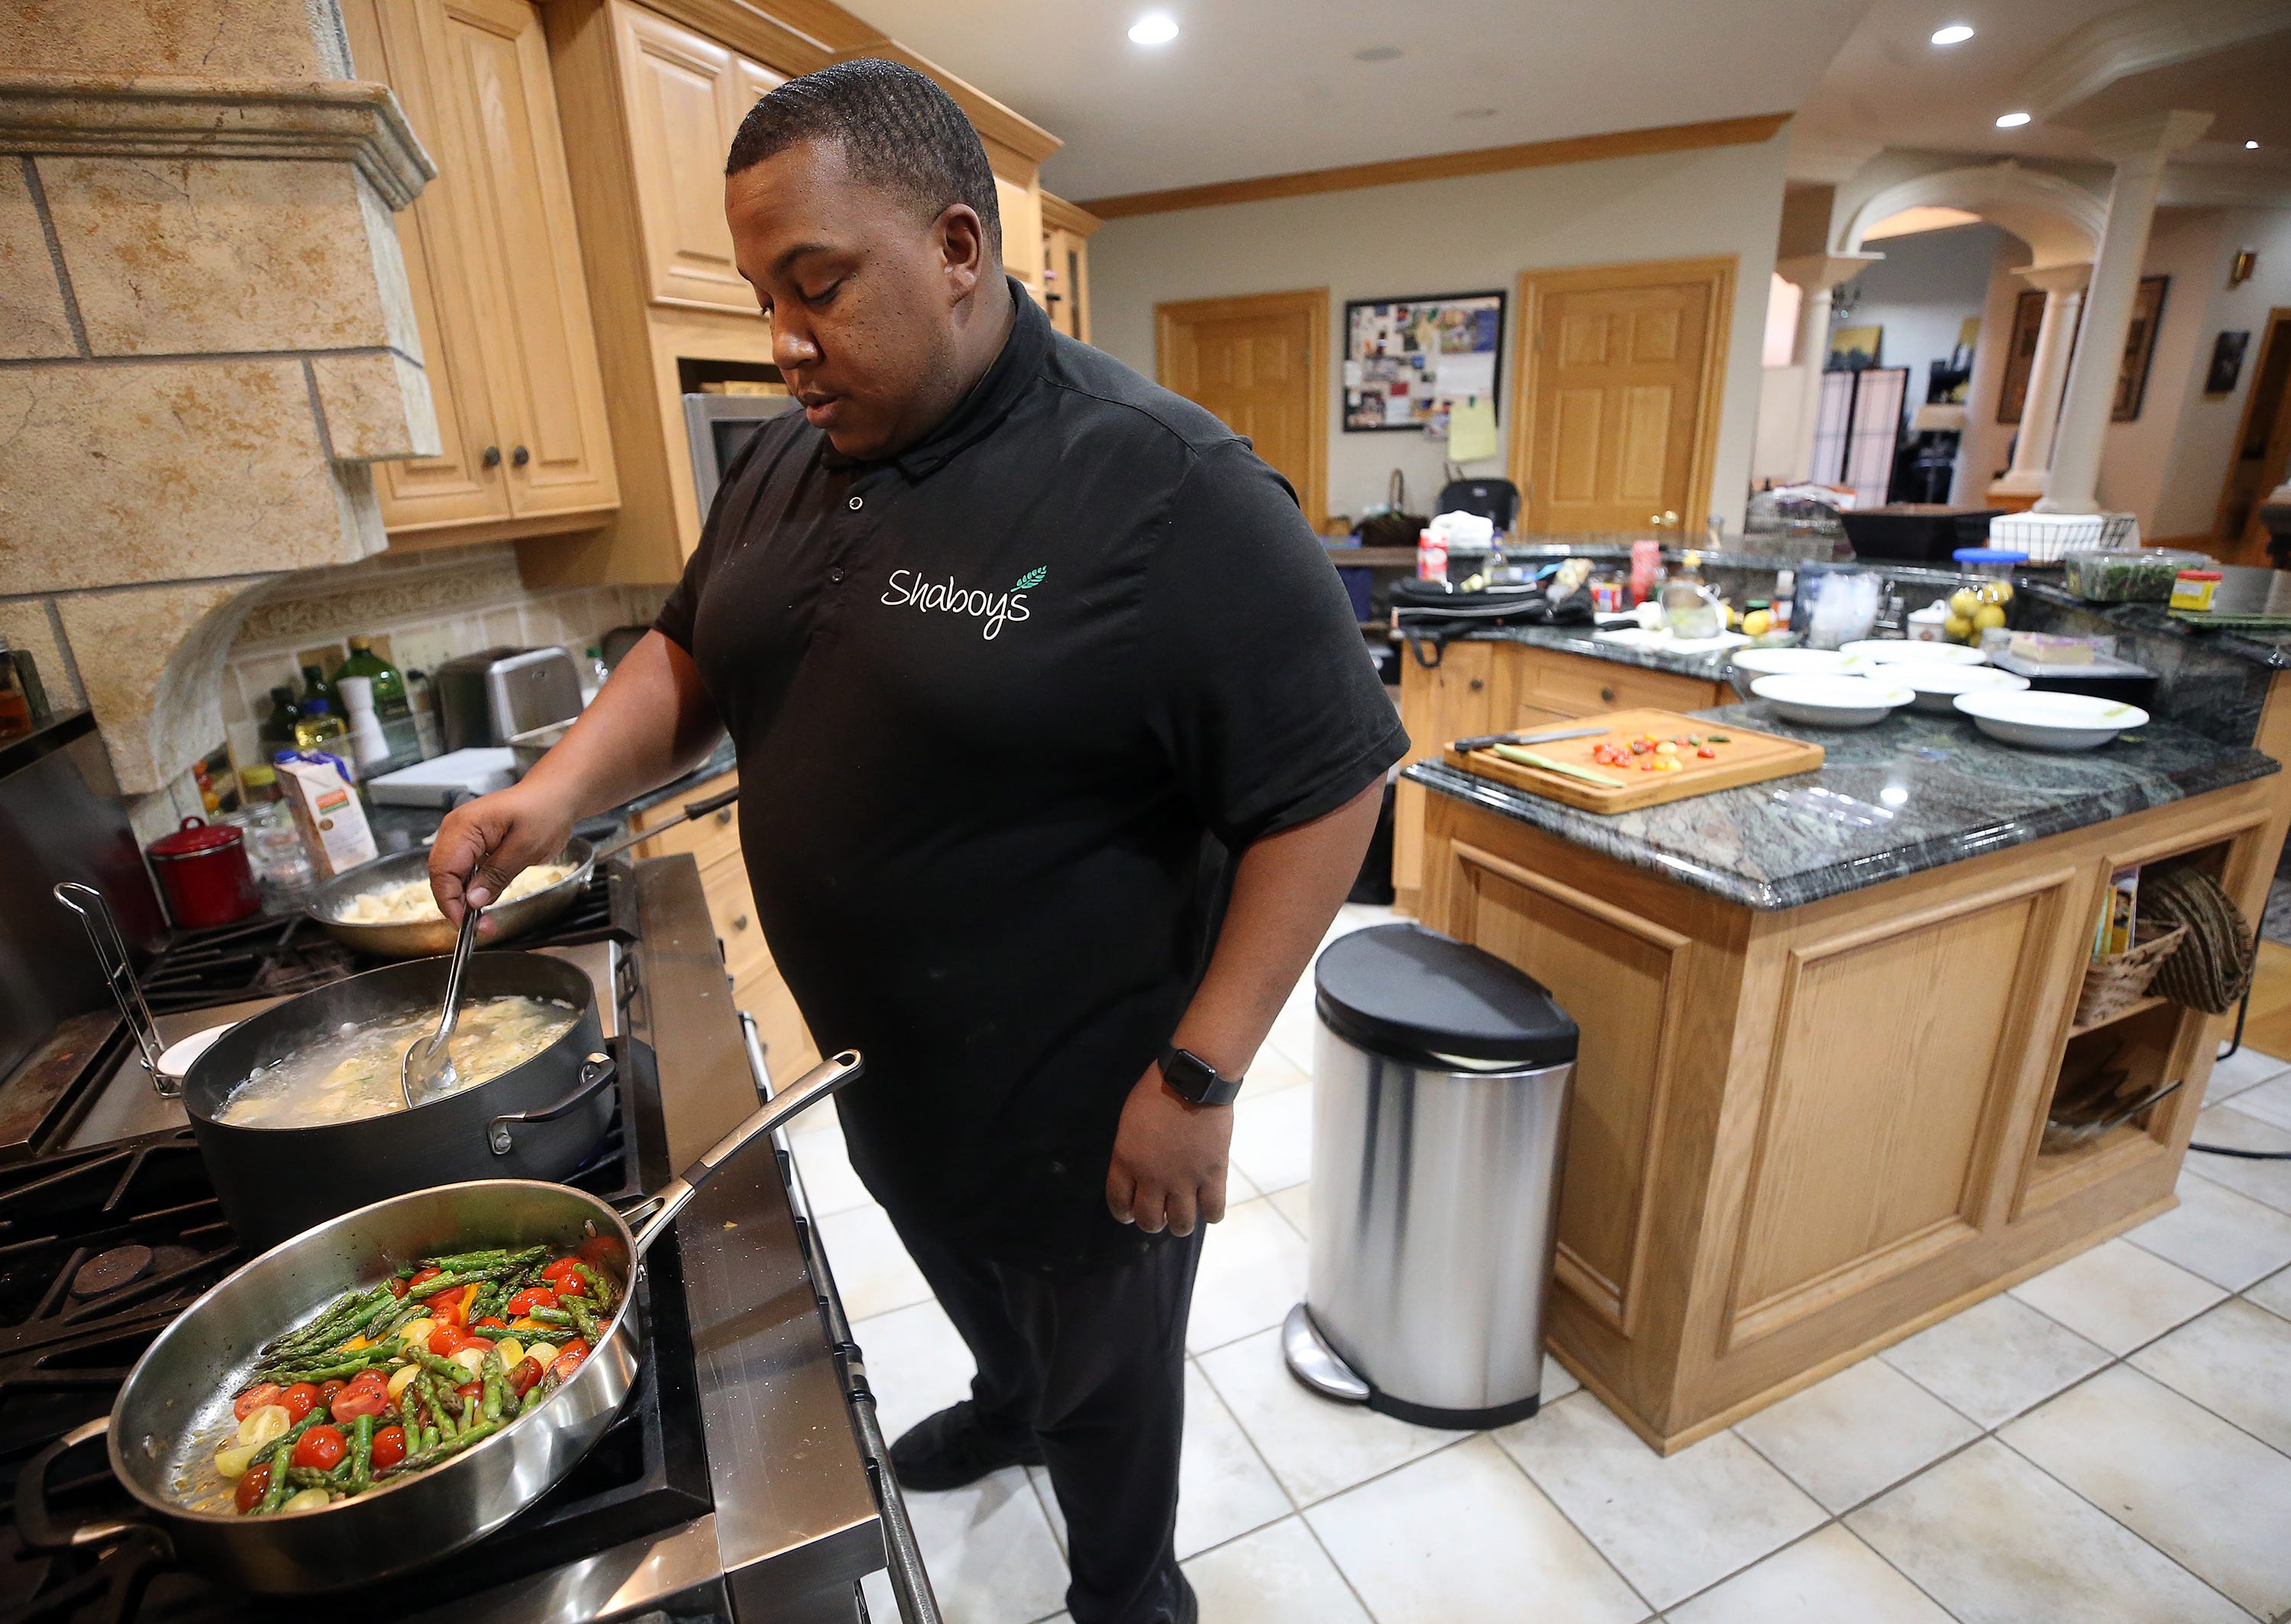 Private chef Dion Millender prepares a meal at a client's home, Sunday, Oct. 30, 2022, in Akron, Ohio.